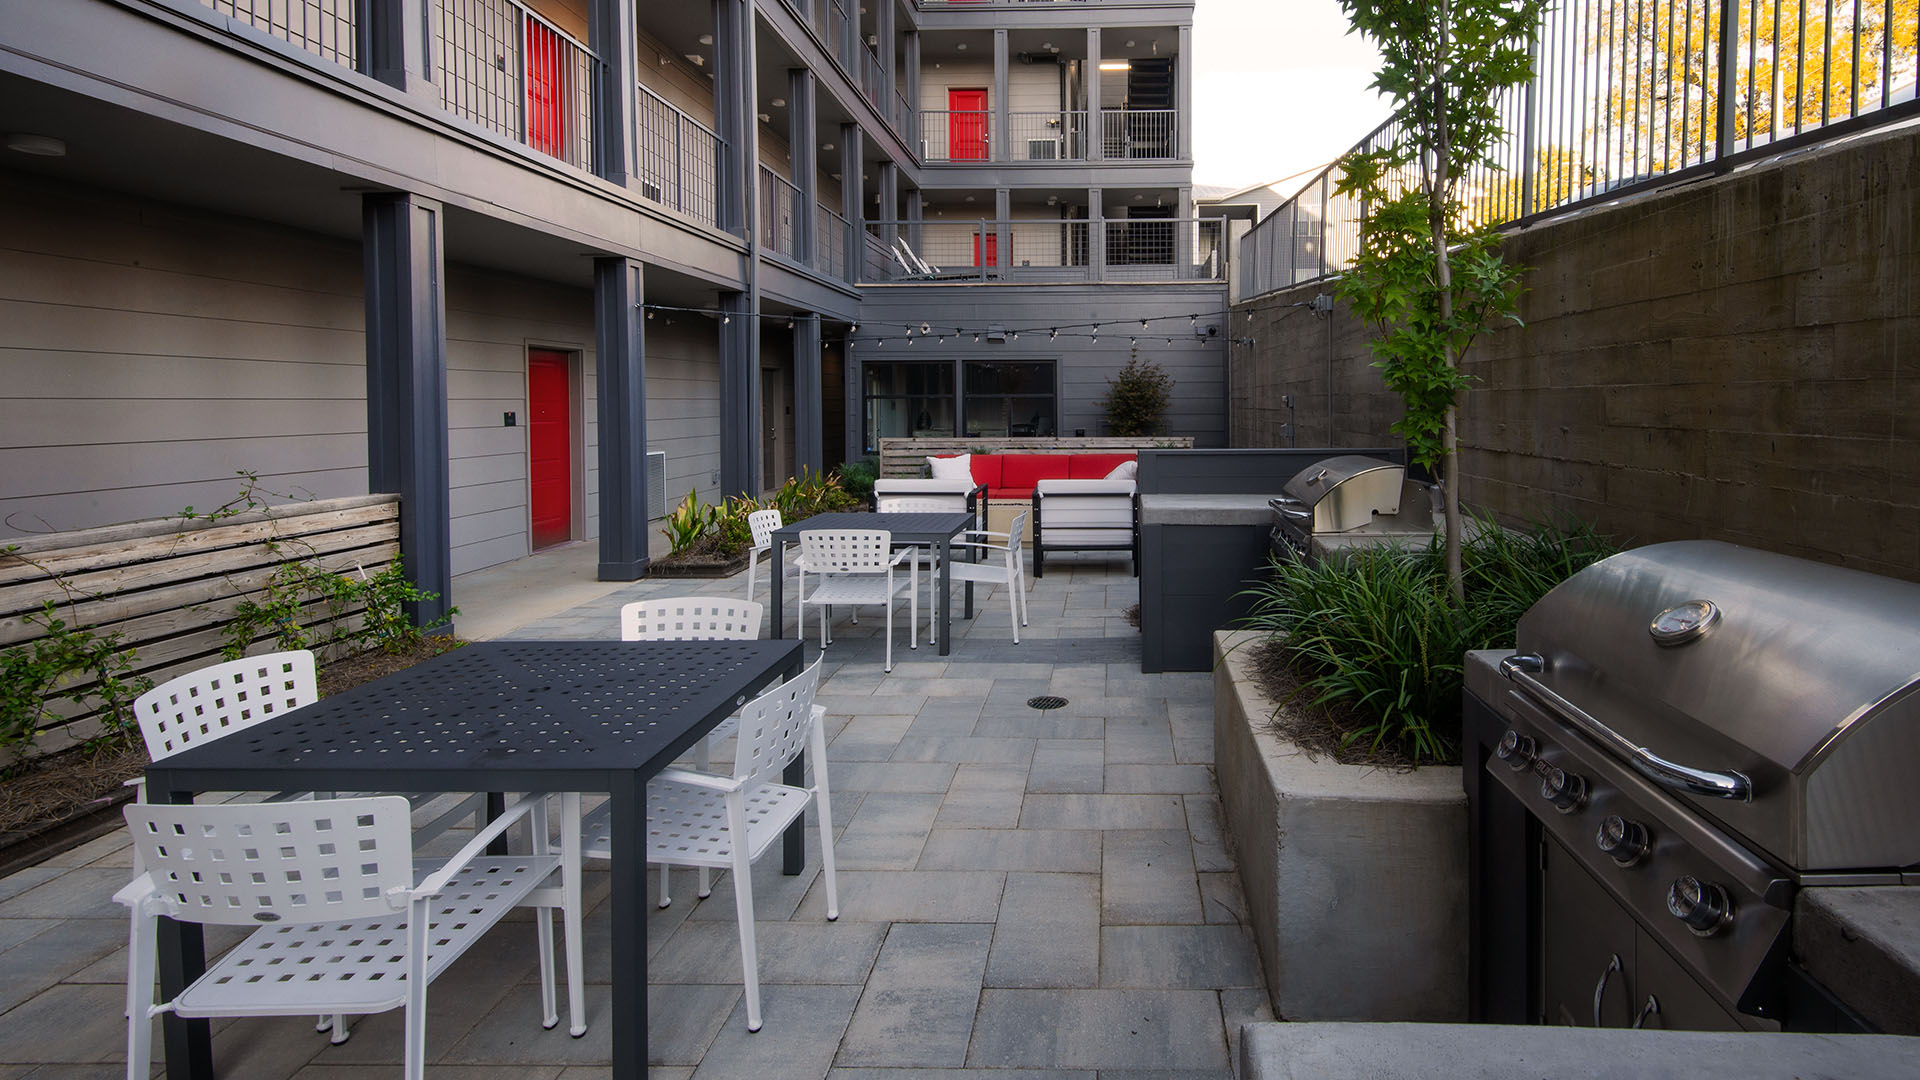 outdoor gas grills, cushioned outdoor furniture adjacent to nearby walking spaces